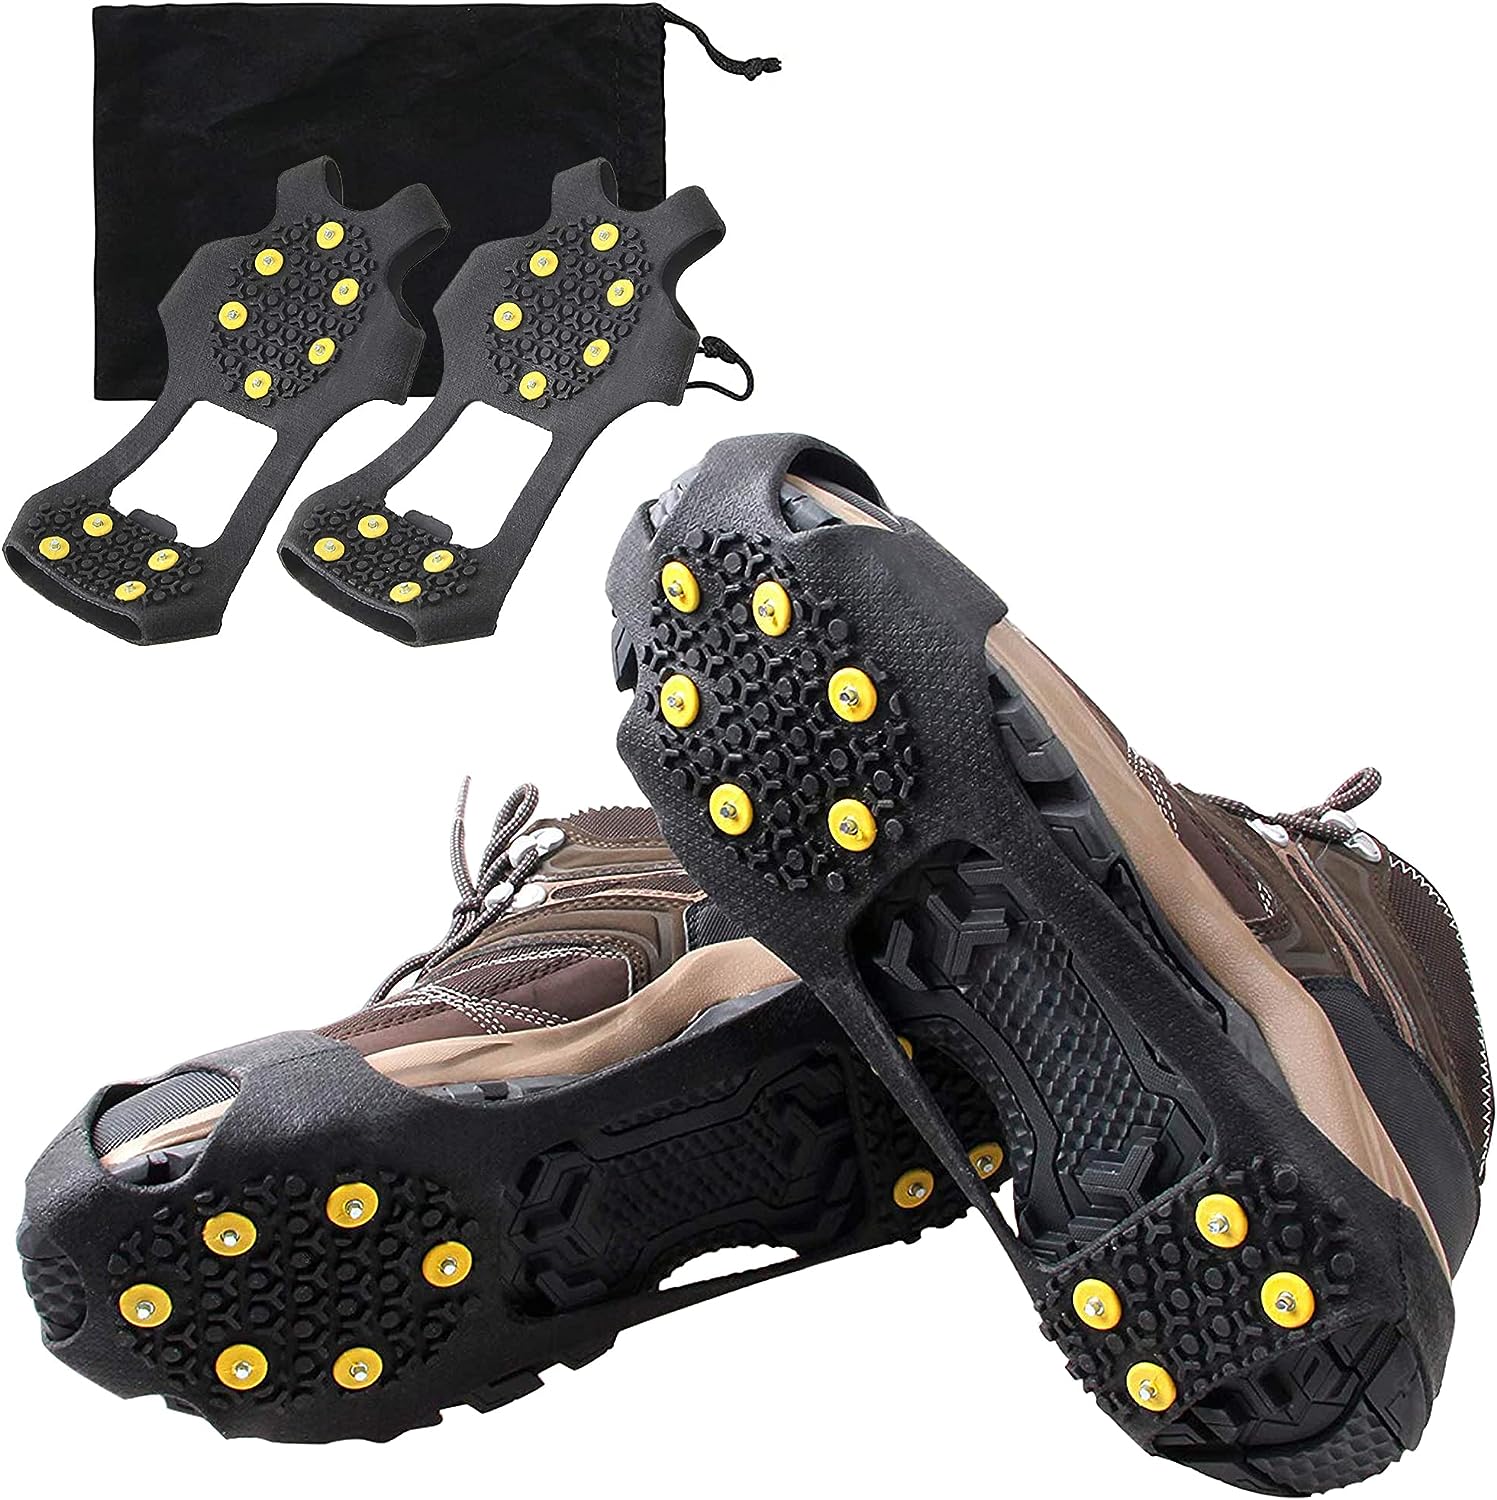 Ice Cleats for Shoes and Boots Snow Traction Cleat [...]